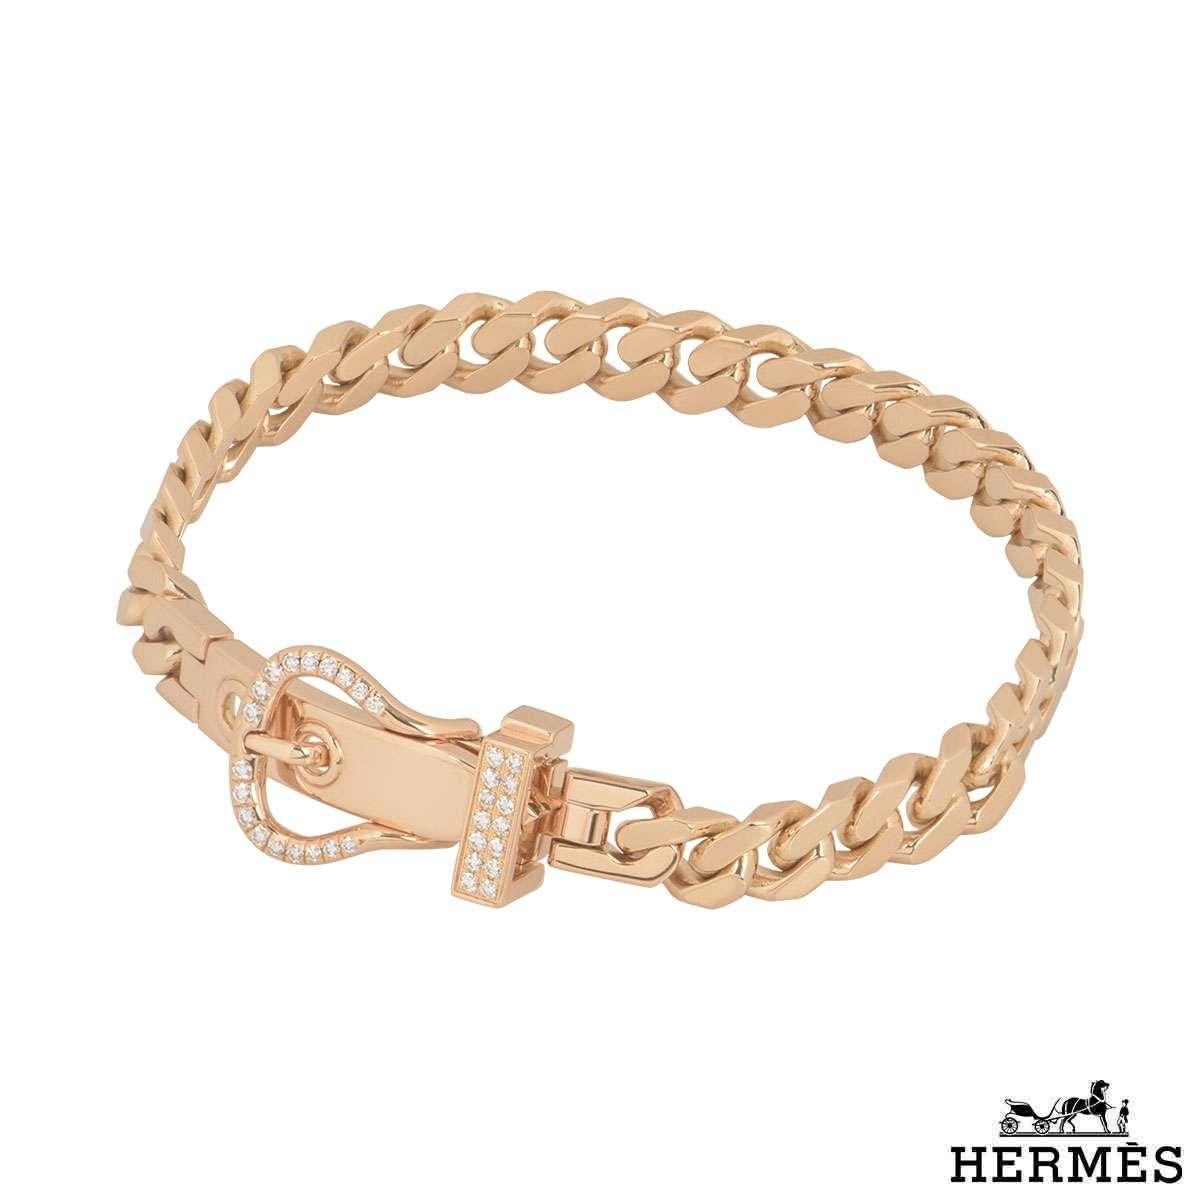 A beautiful 18k rose gold diamond Hermes bracelet from the Boucle Sellier collection. The bracelet comprises of a buckle motif partially set with 32 round brilliant cut diamonds with a total weight of 0.18ct. The bracelet has an adjustable length